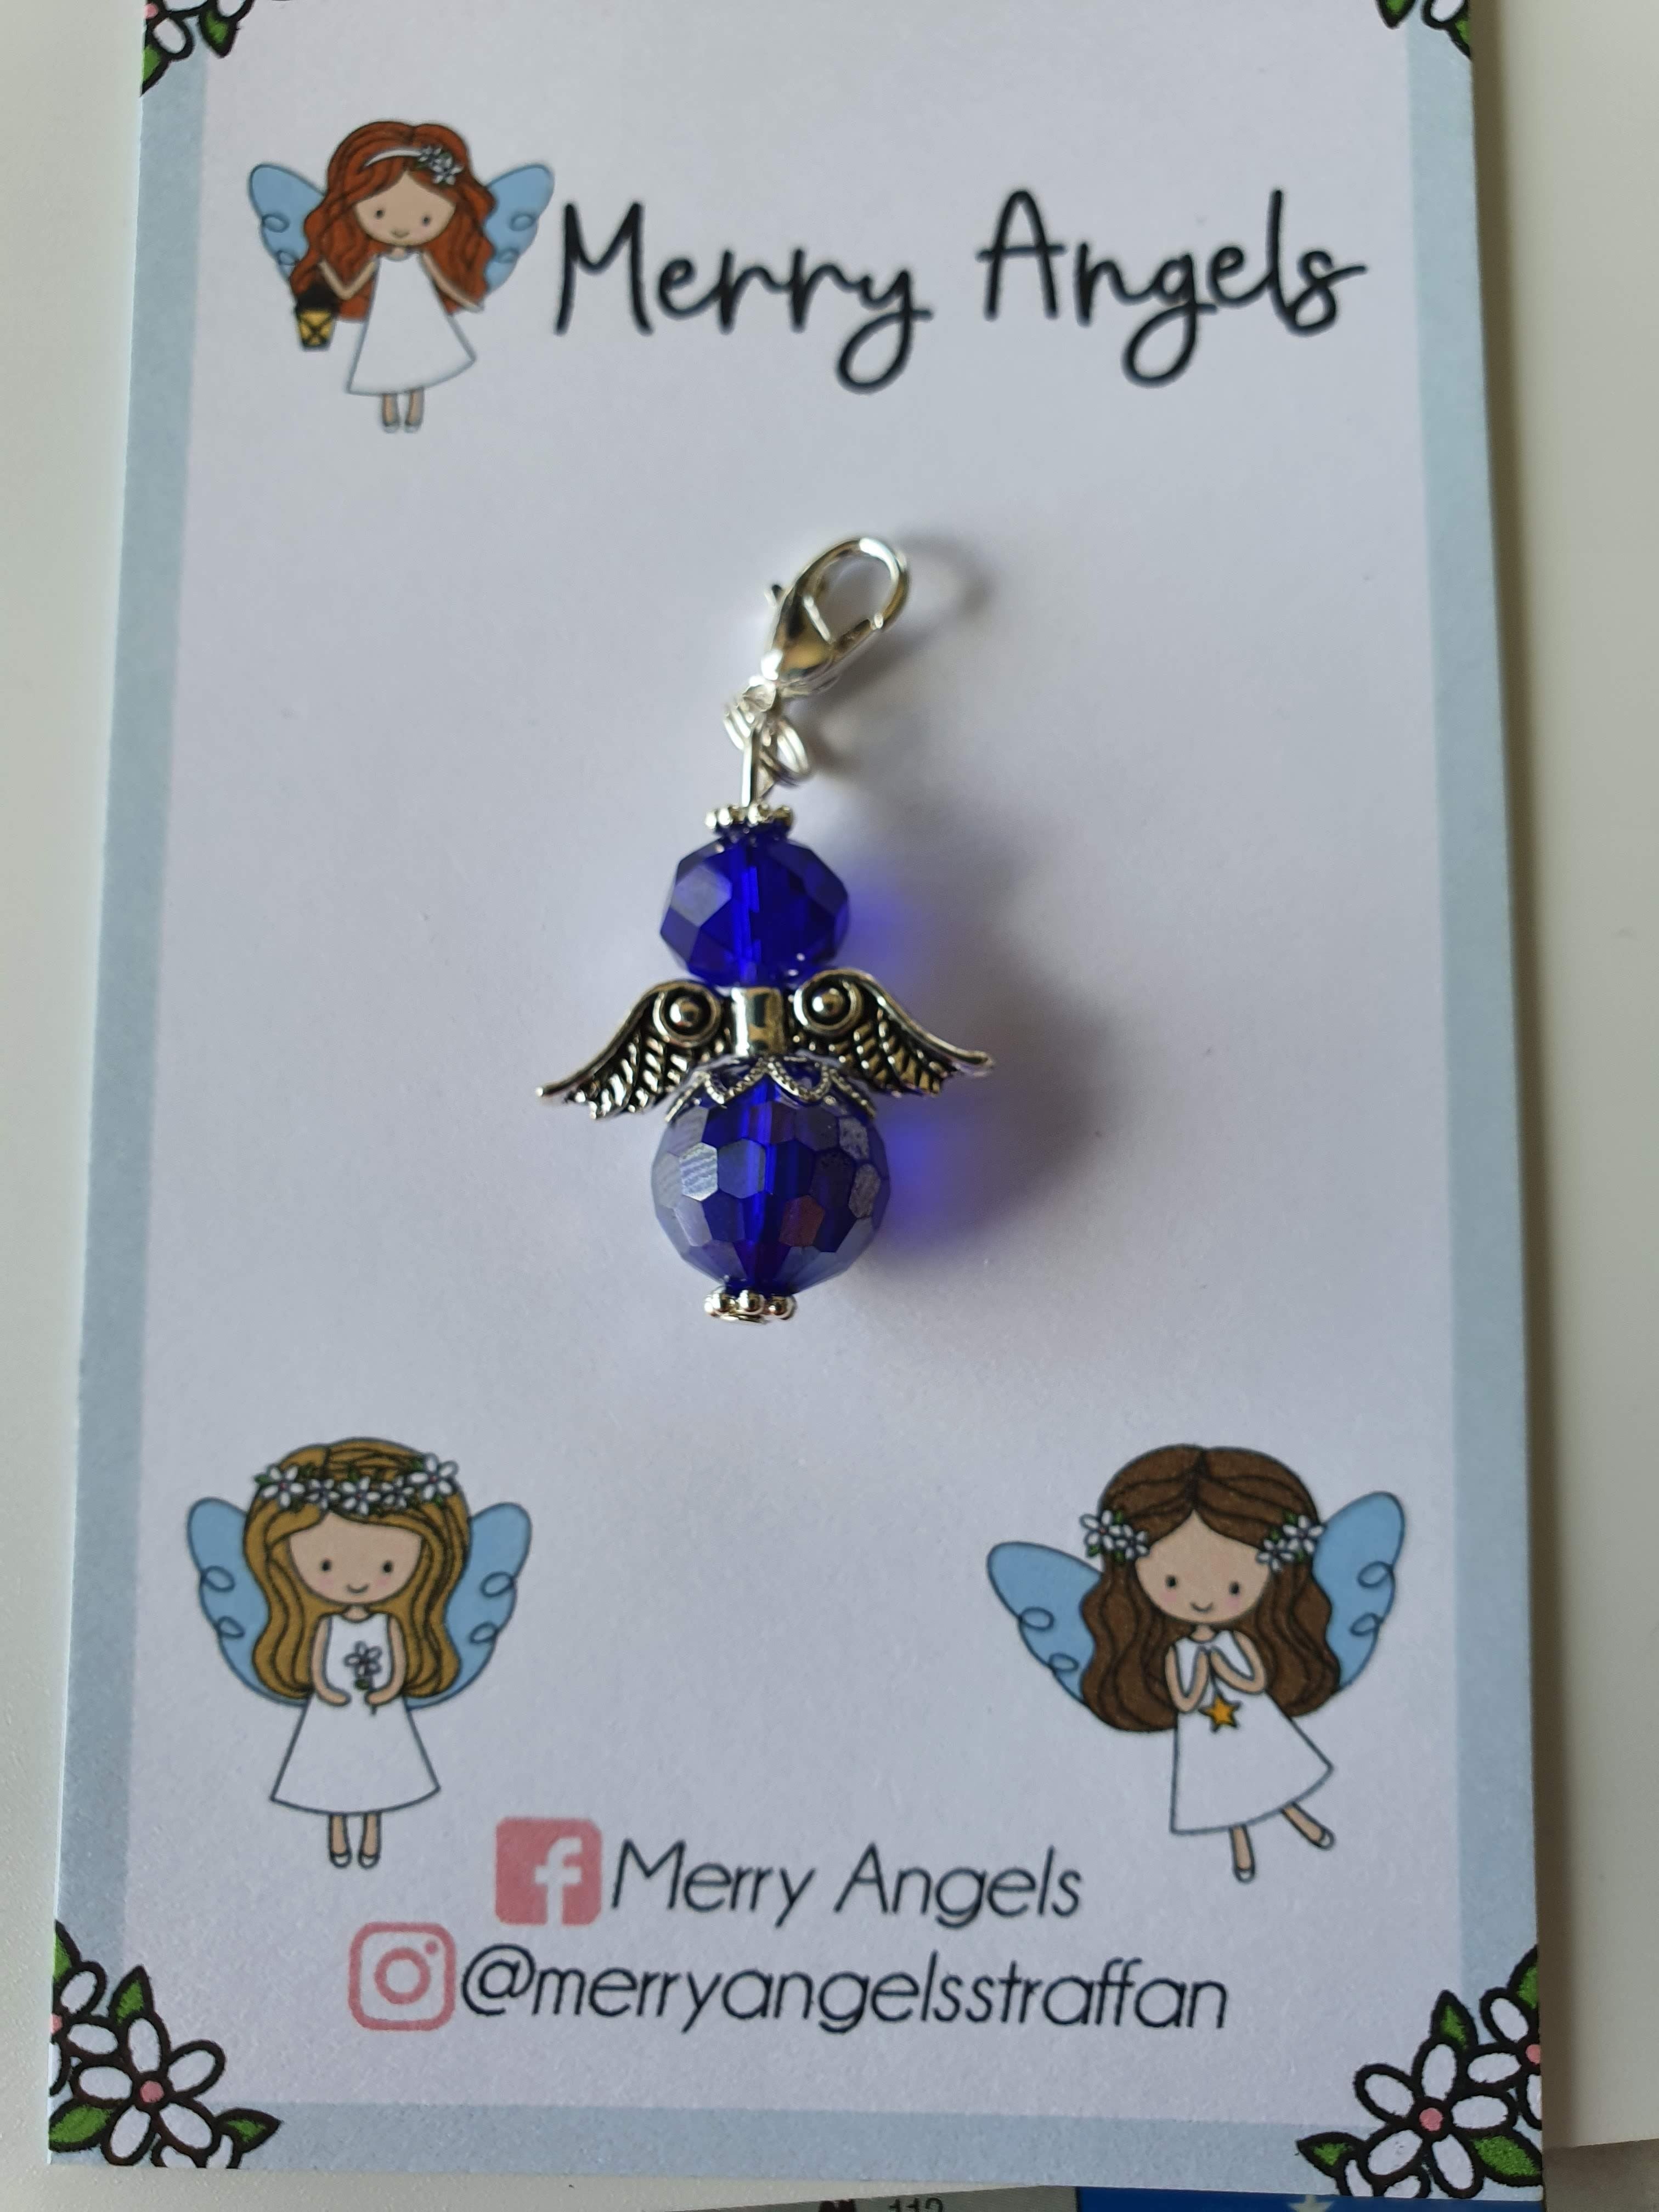 This is a picture of a blue angel hug on a piece of card